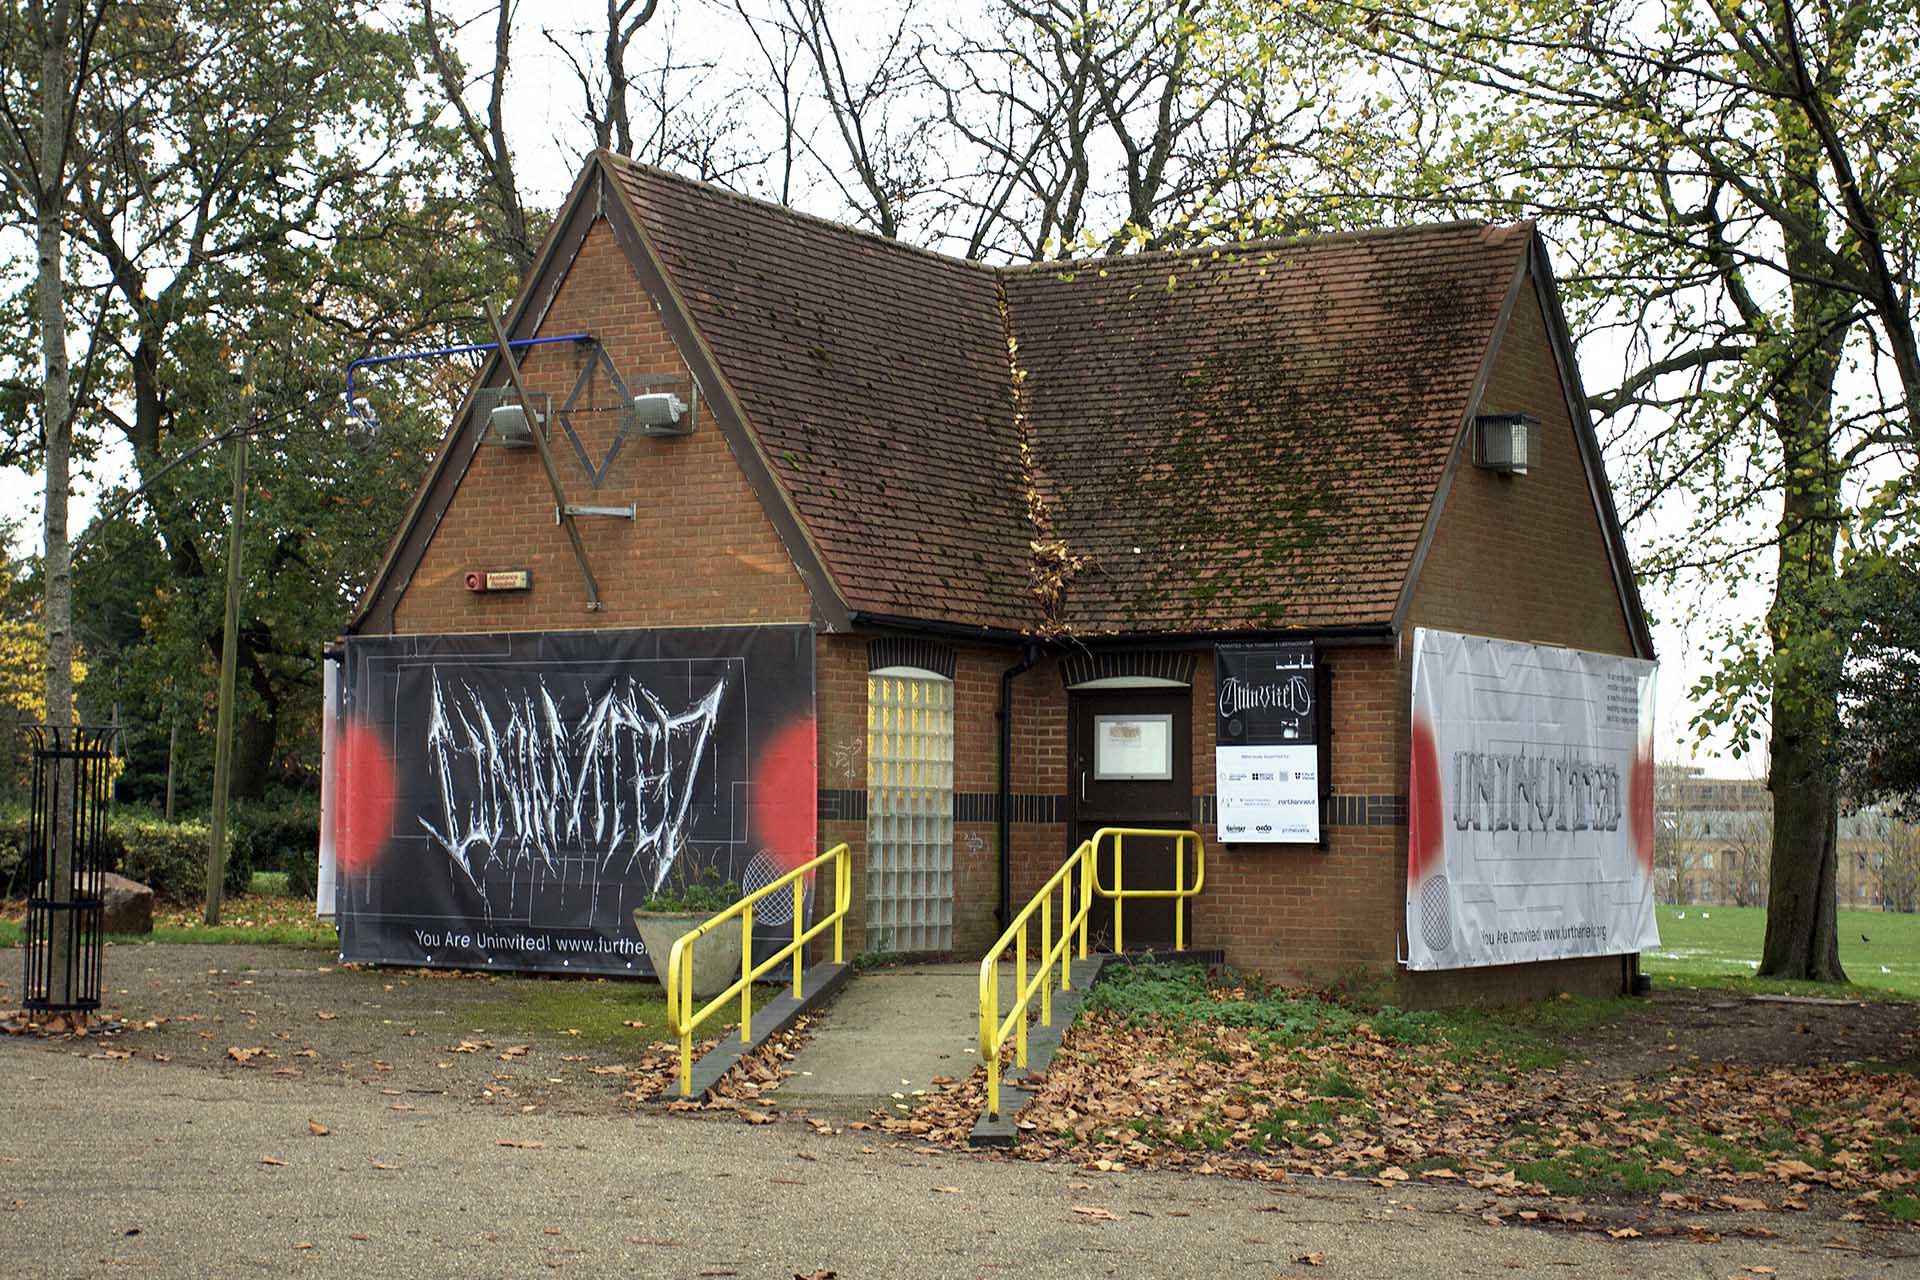 Image shows Furtherfield Gallery in Finsbury Park, covered by large hoardings displaying the uninvited branding and logotypes